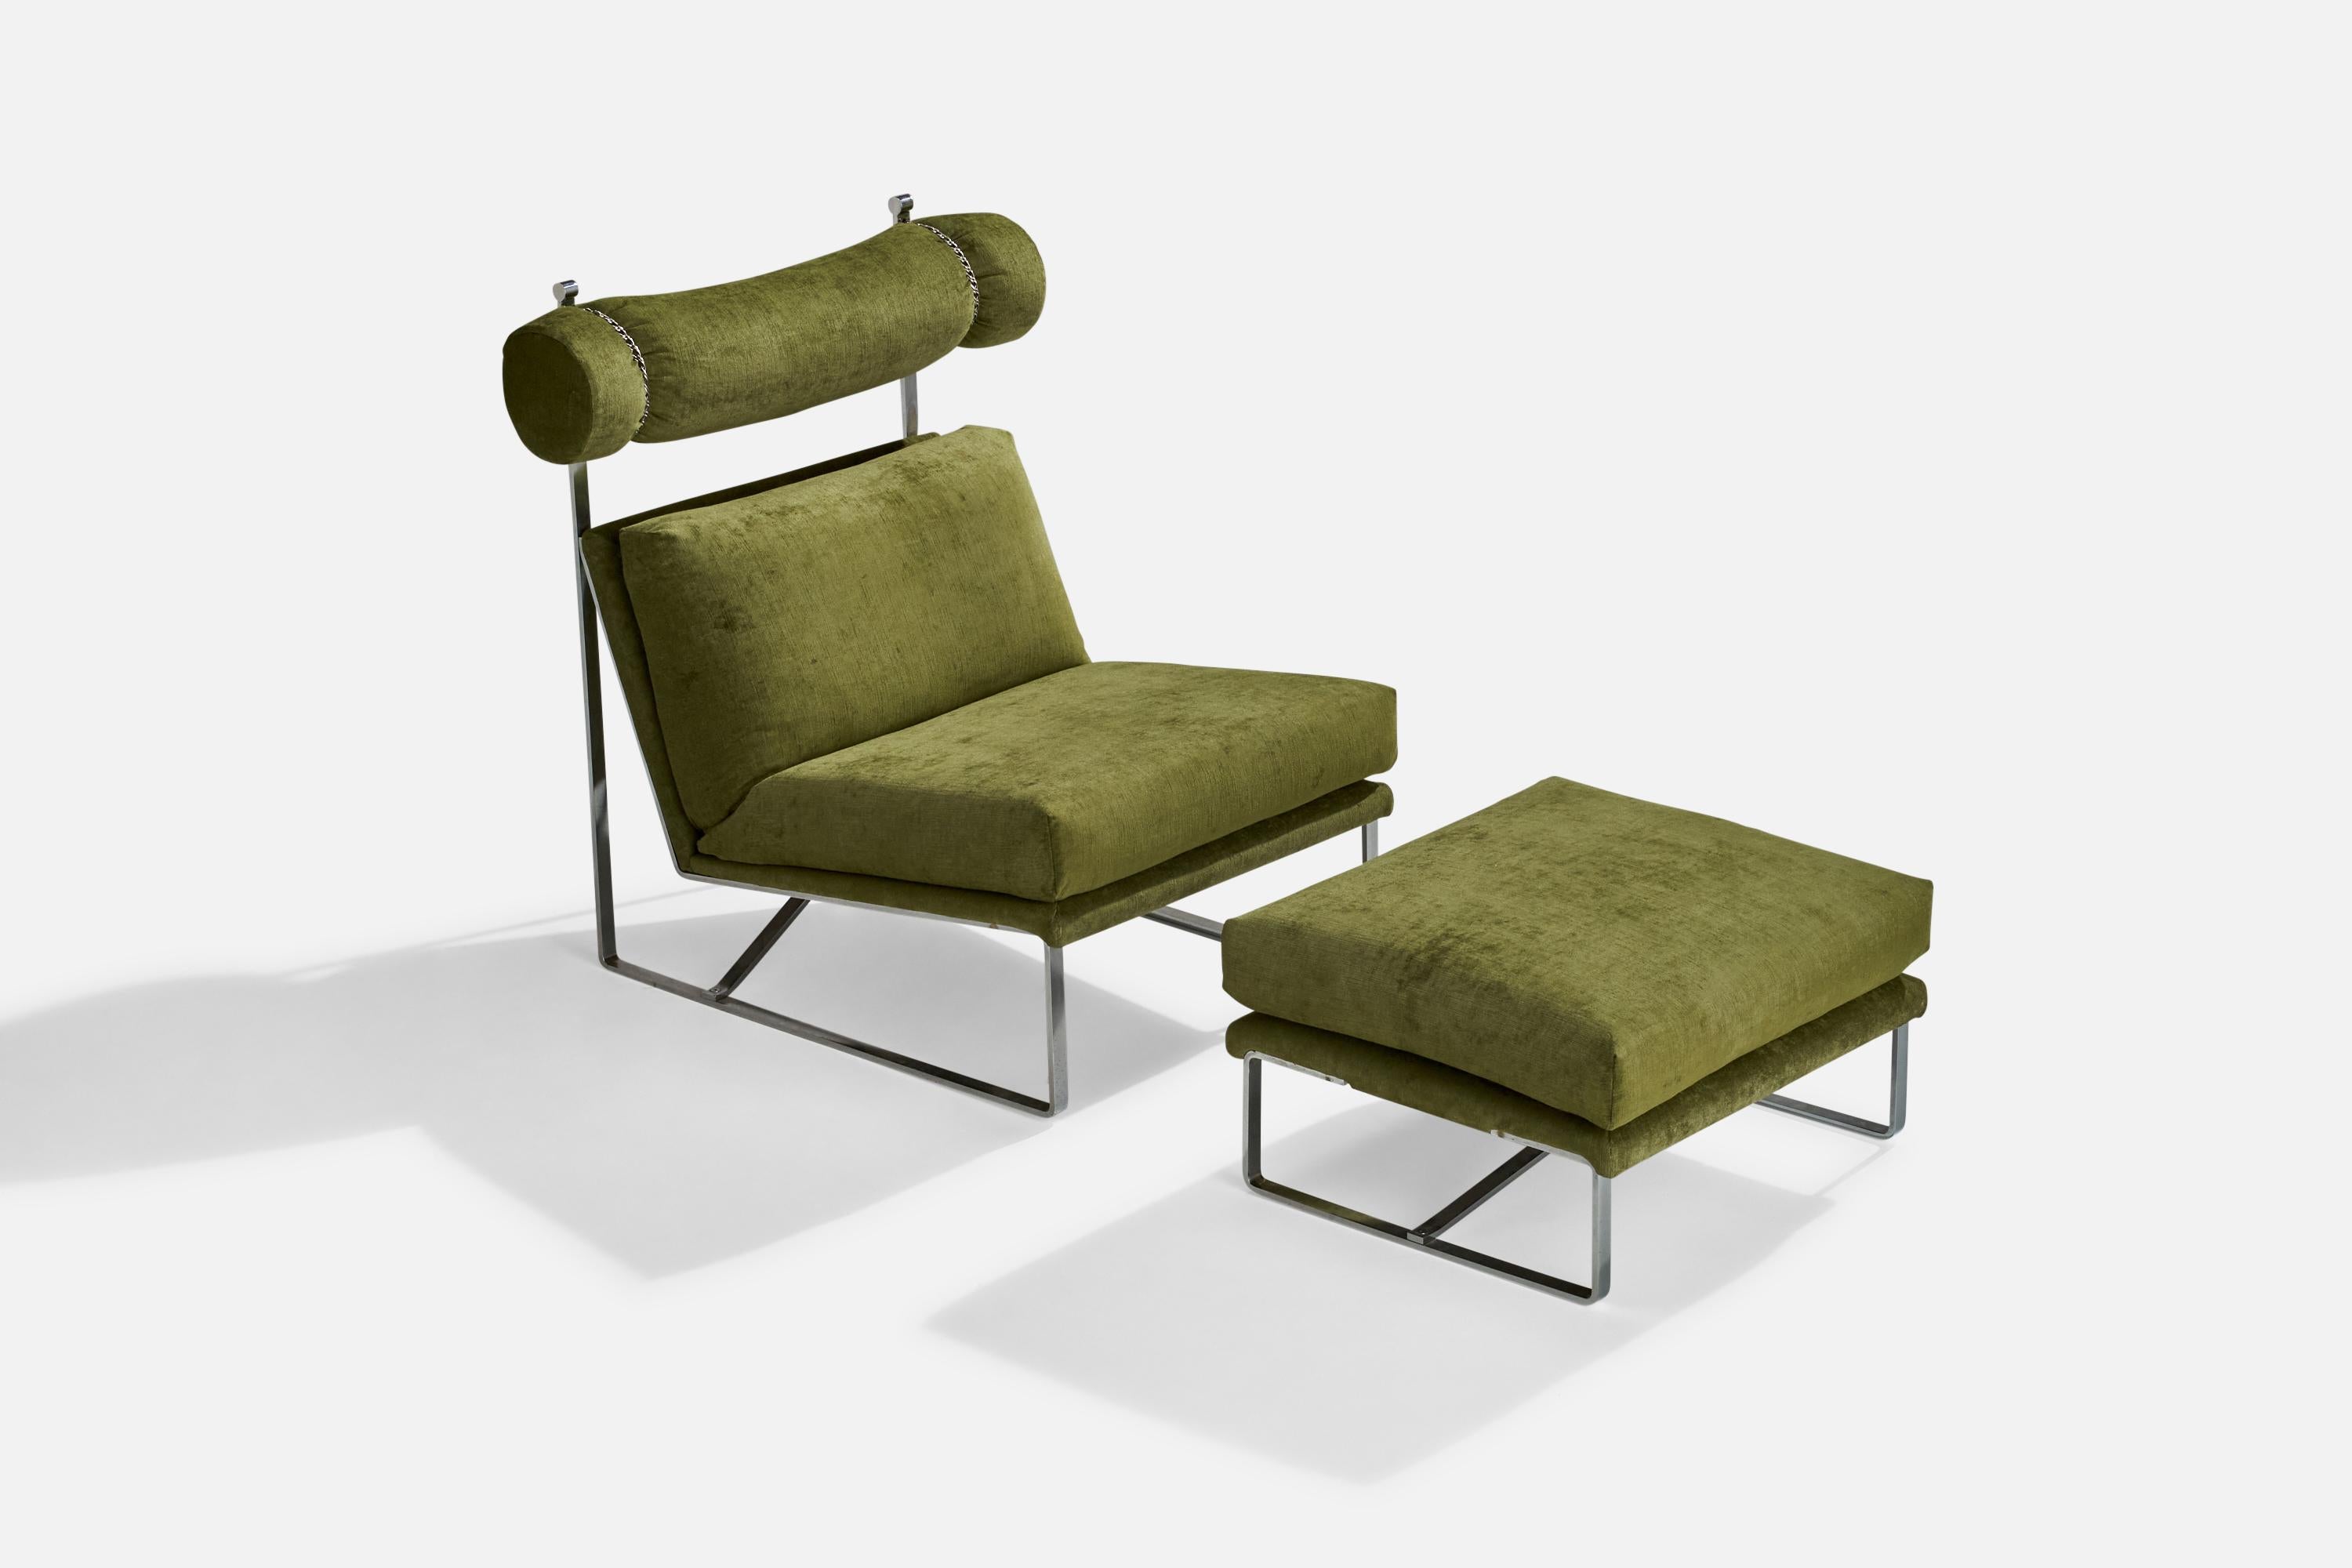 A green velvet and steel lounge chair with ottoman designed by Milo Baughman and produced by Thayer-Coggin, High Point, North Carolina, USA, 1970s.

Seat height 16.5”.